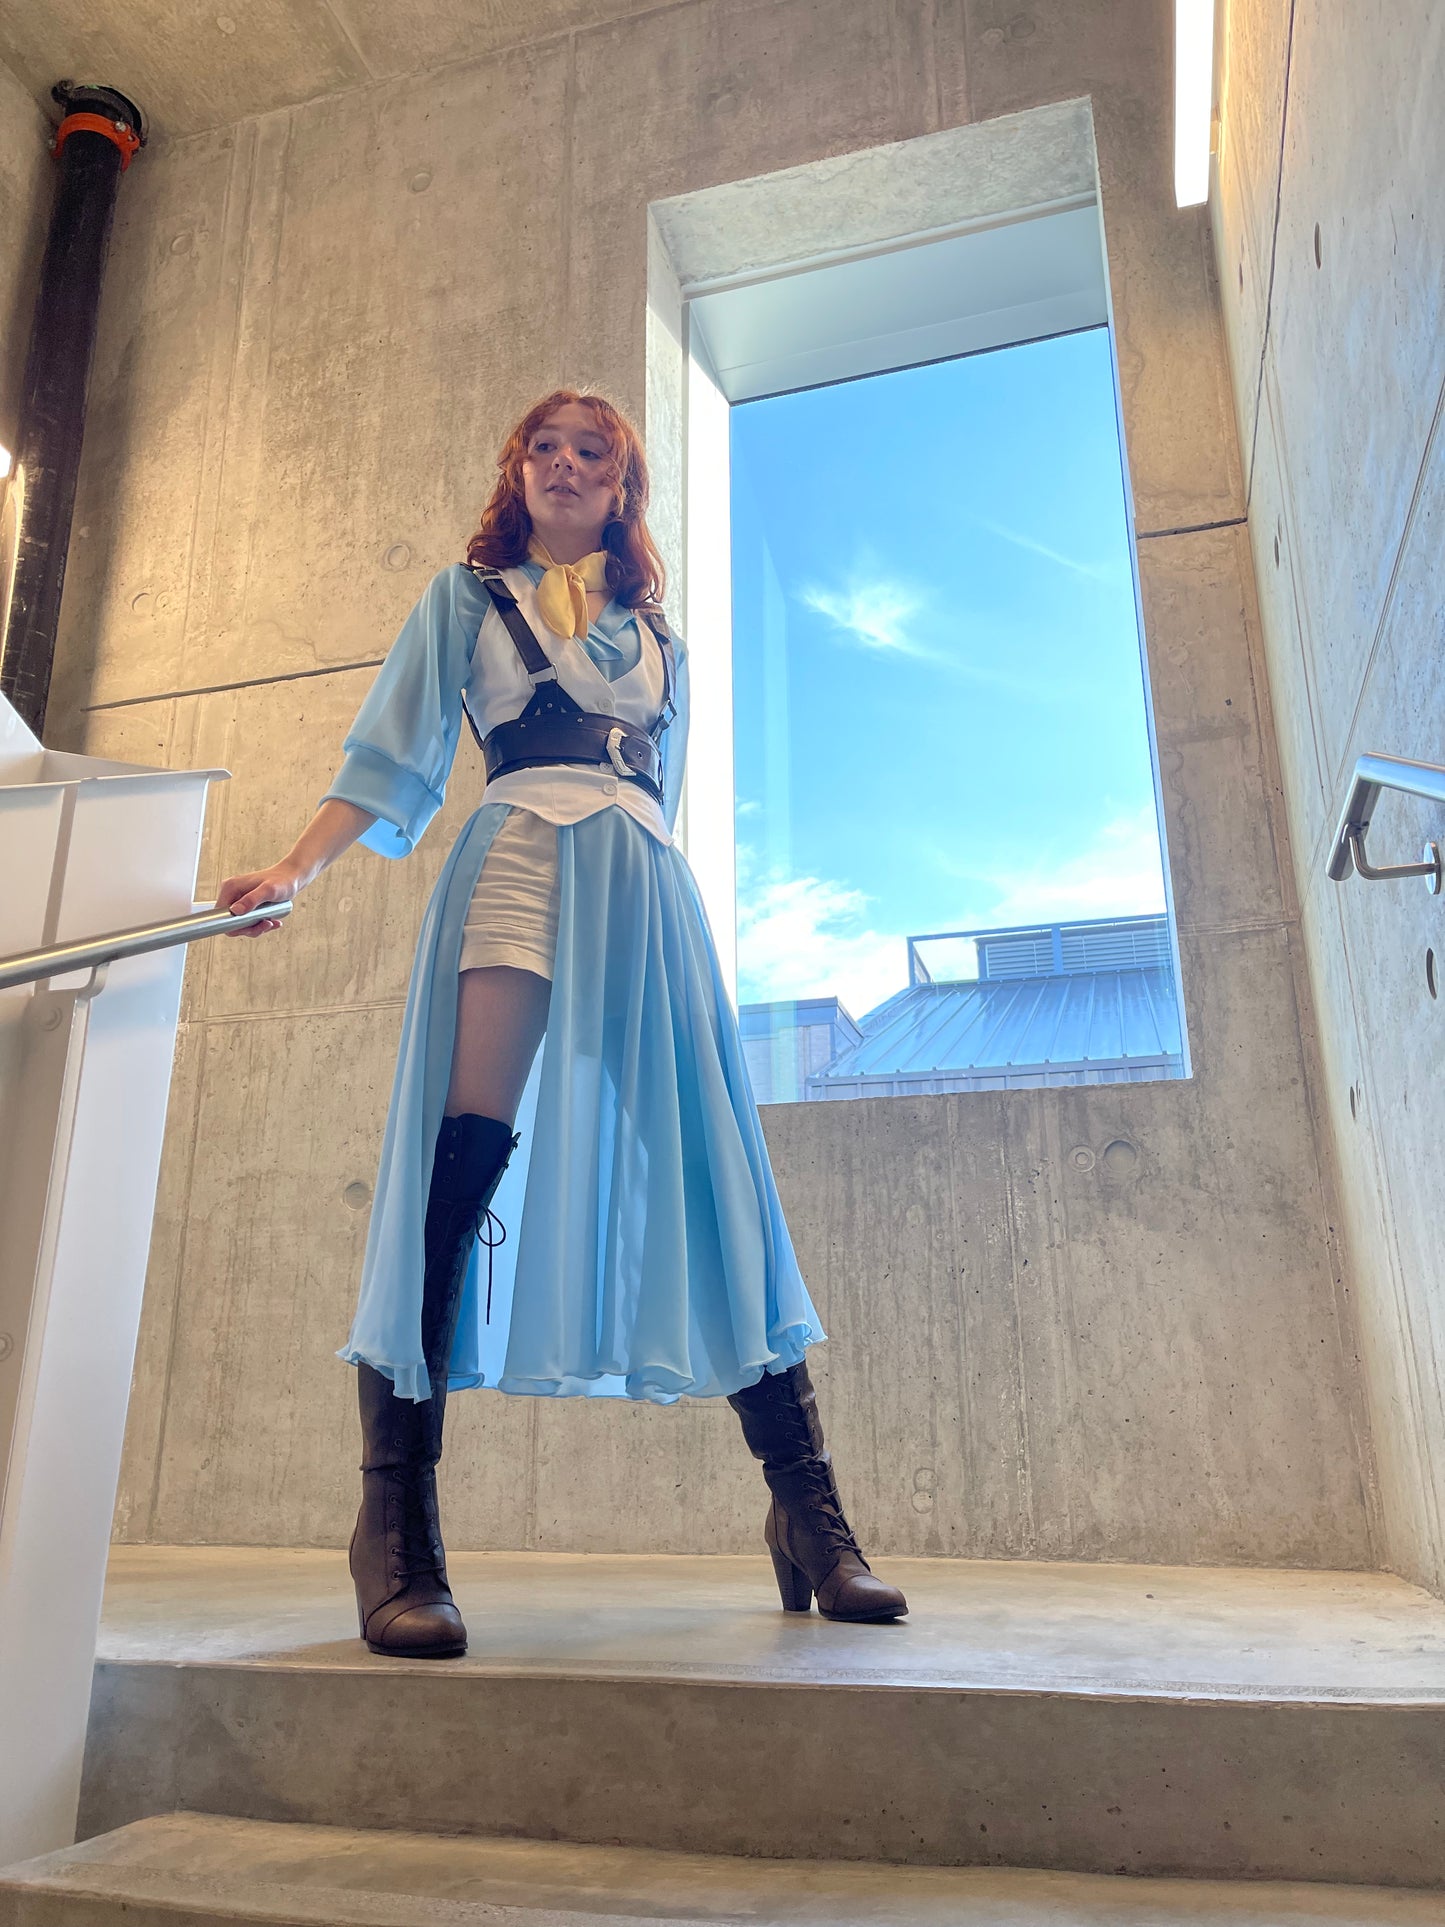 Imogen's Vest and Chemise PDF Cosplay Pattern | Critical Role Inspired